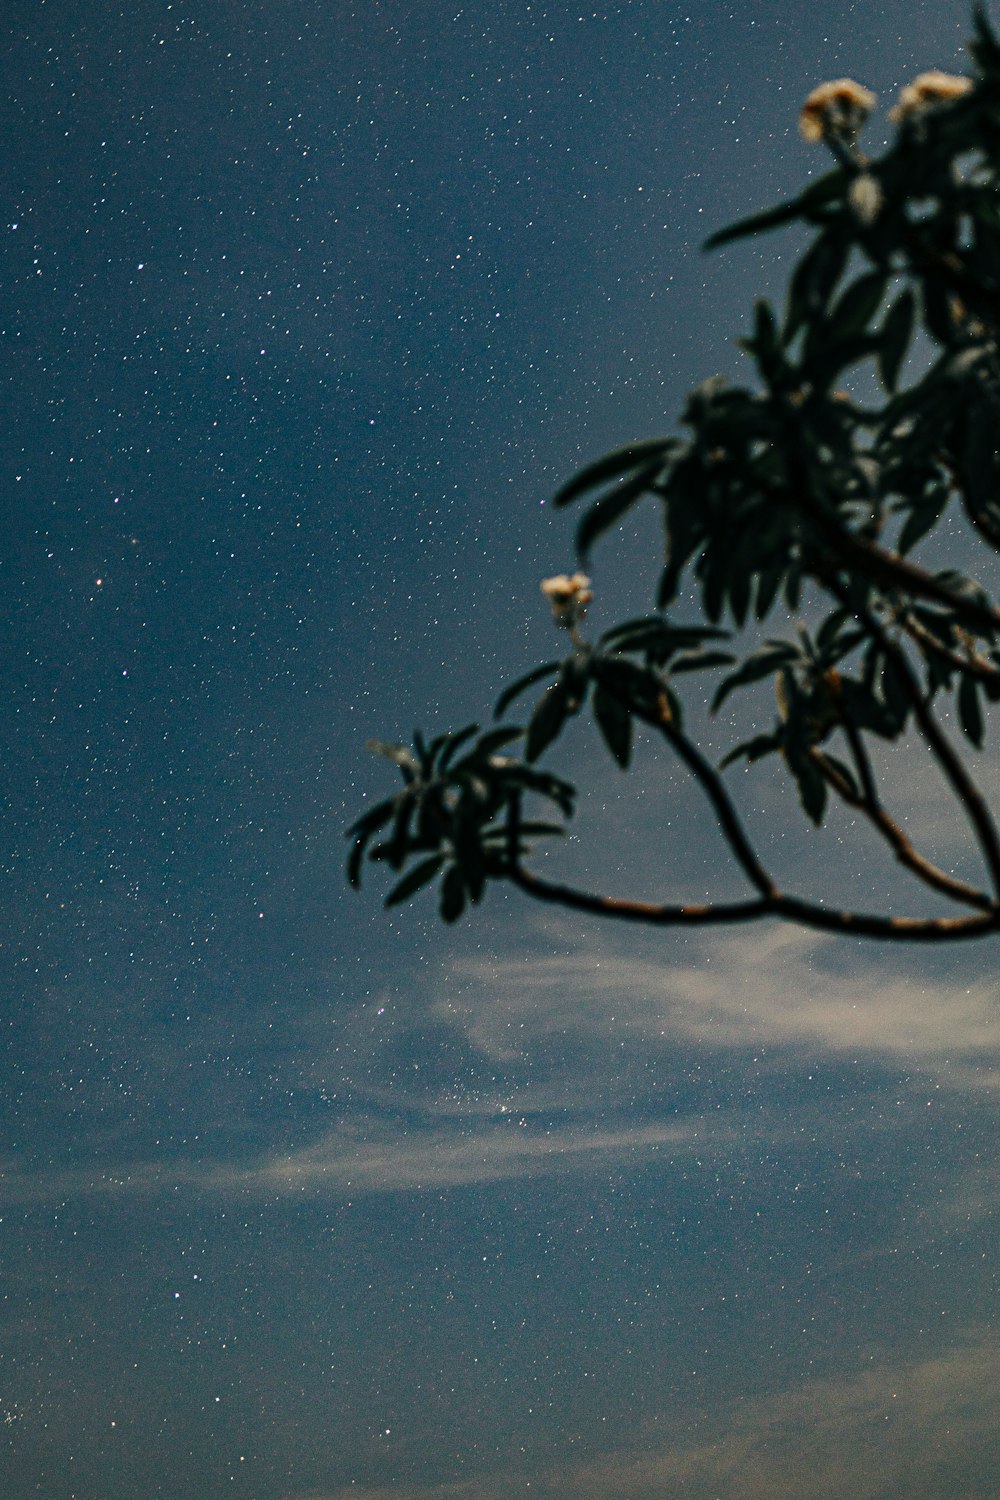 a tree branch with flowers in the foreground and the night sky in the background